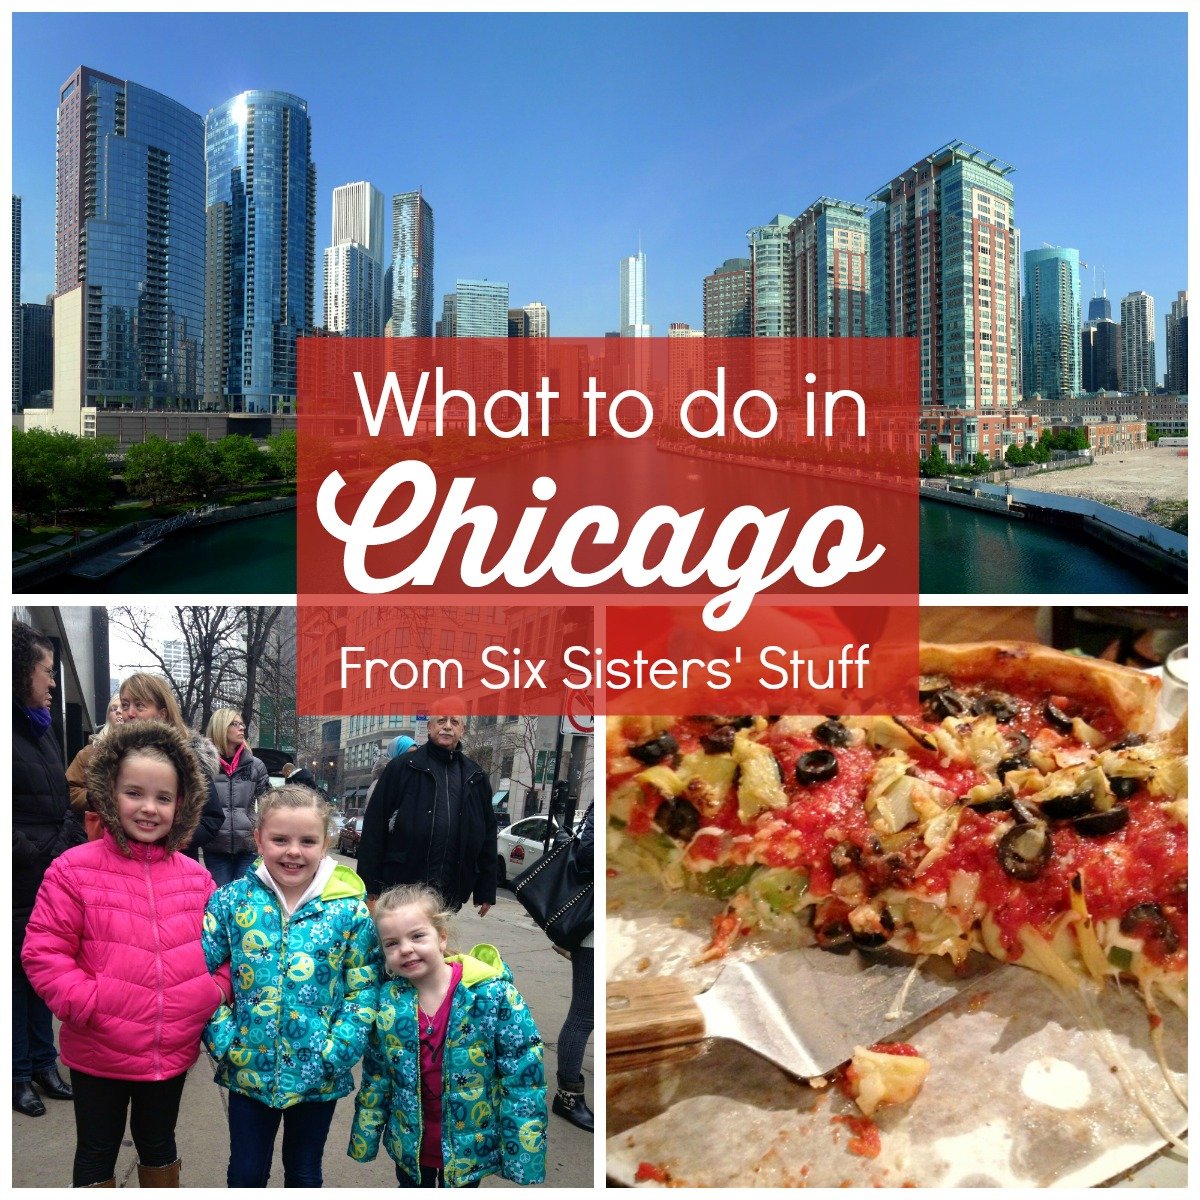 What to do in Chicago